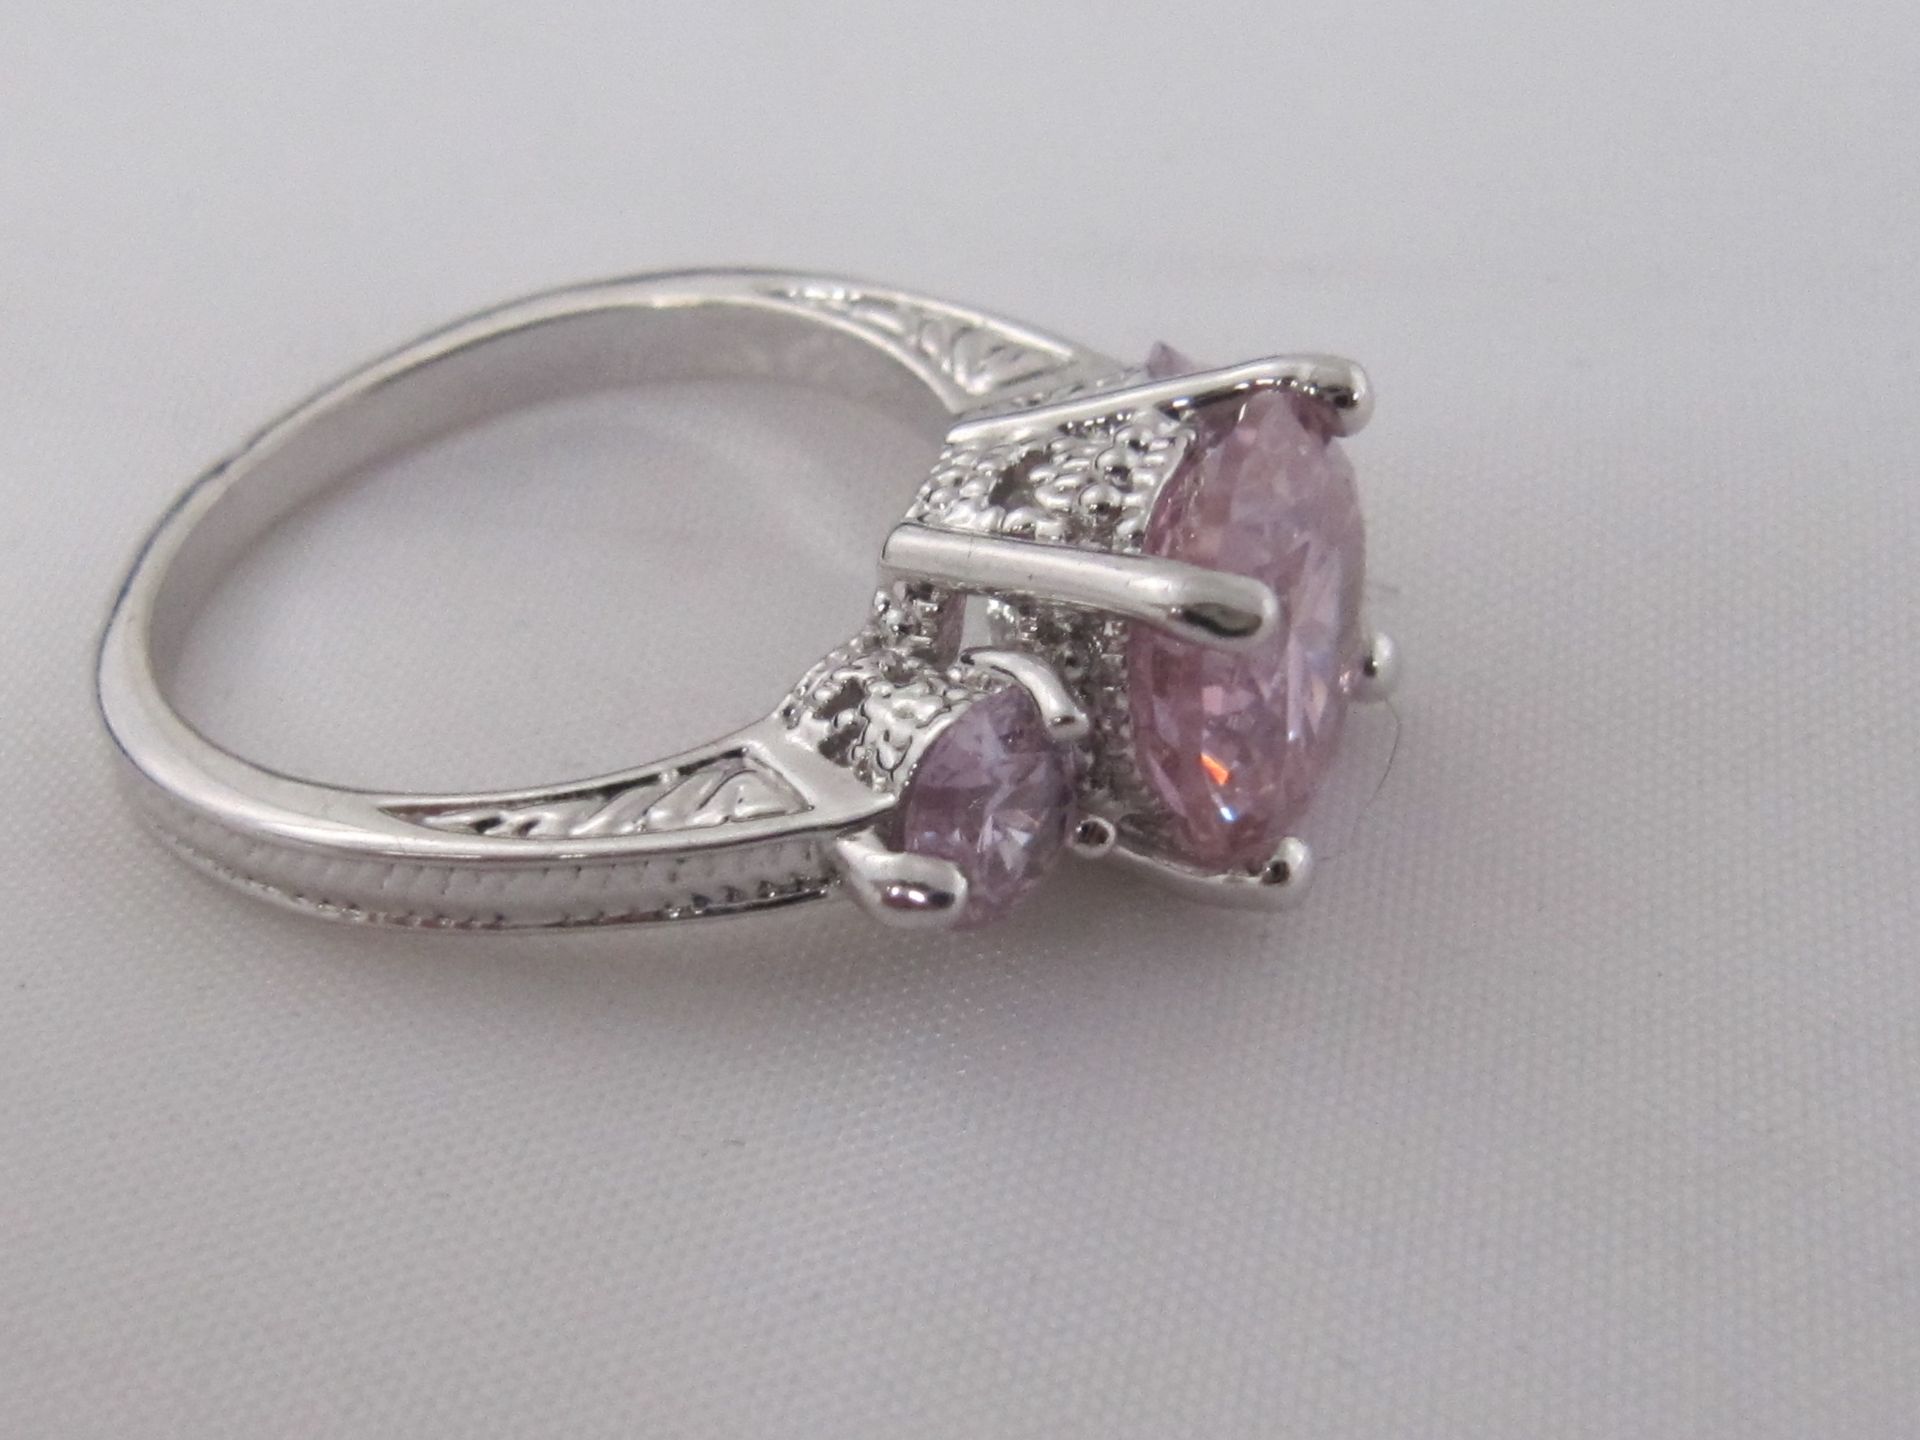 10k White Gold Filled with Pink Sapphires. Size P. - Image 4 of 5